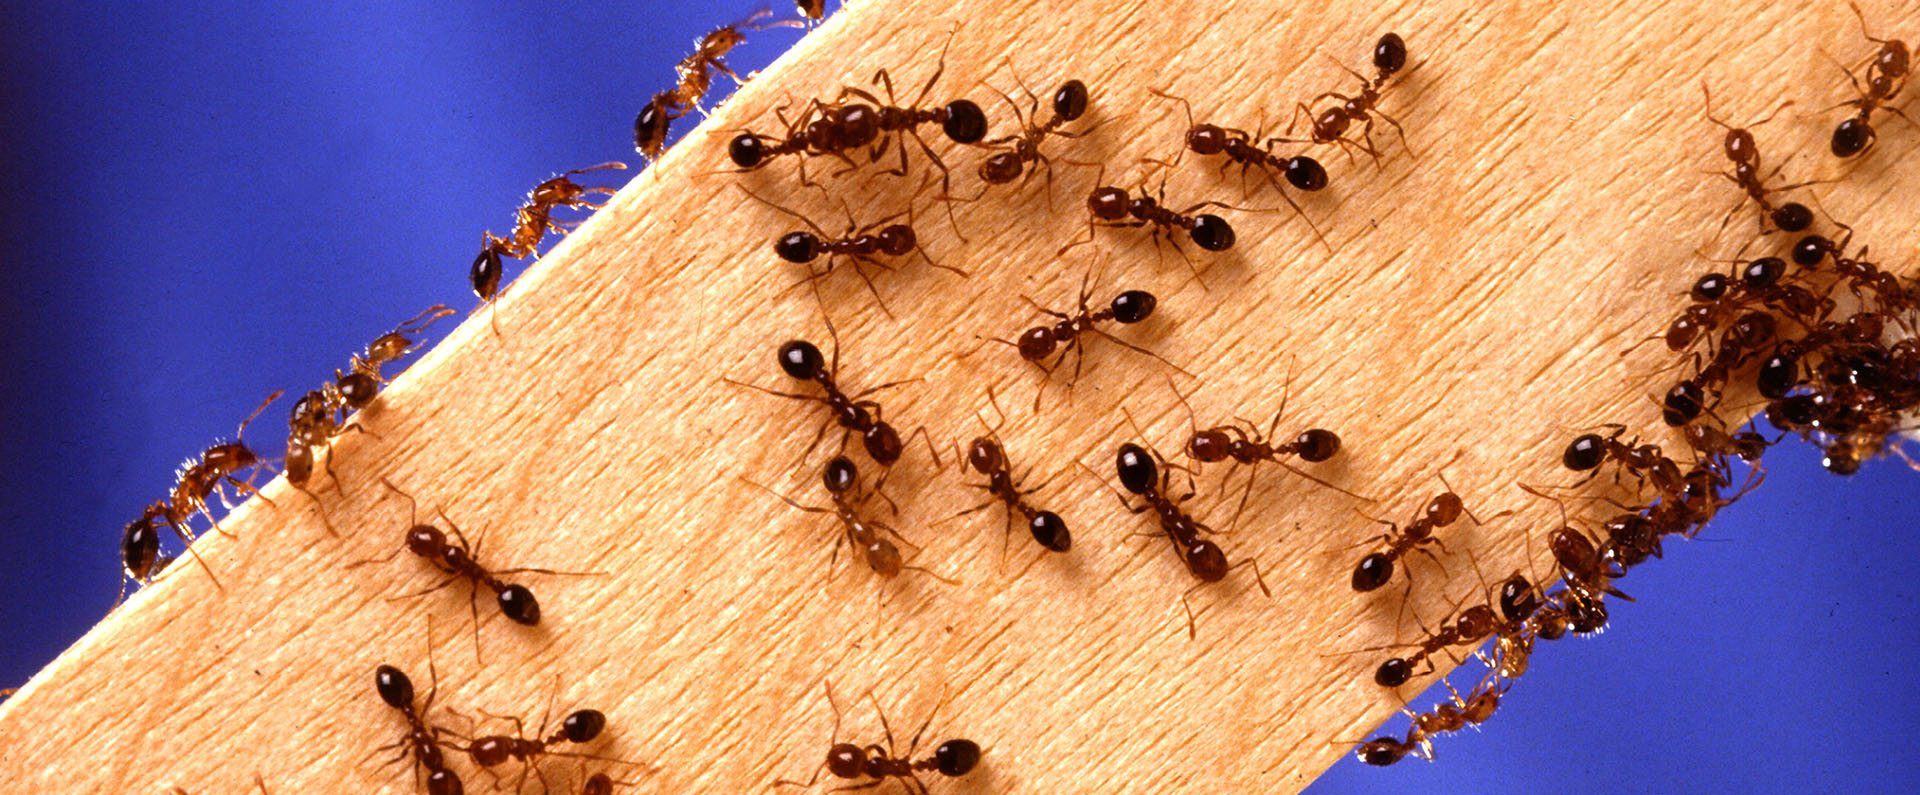 Fire ants on a wooden stick 